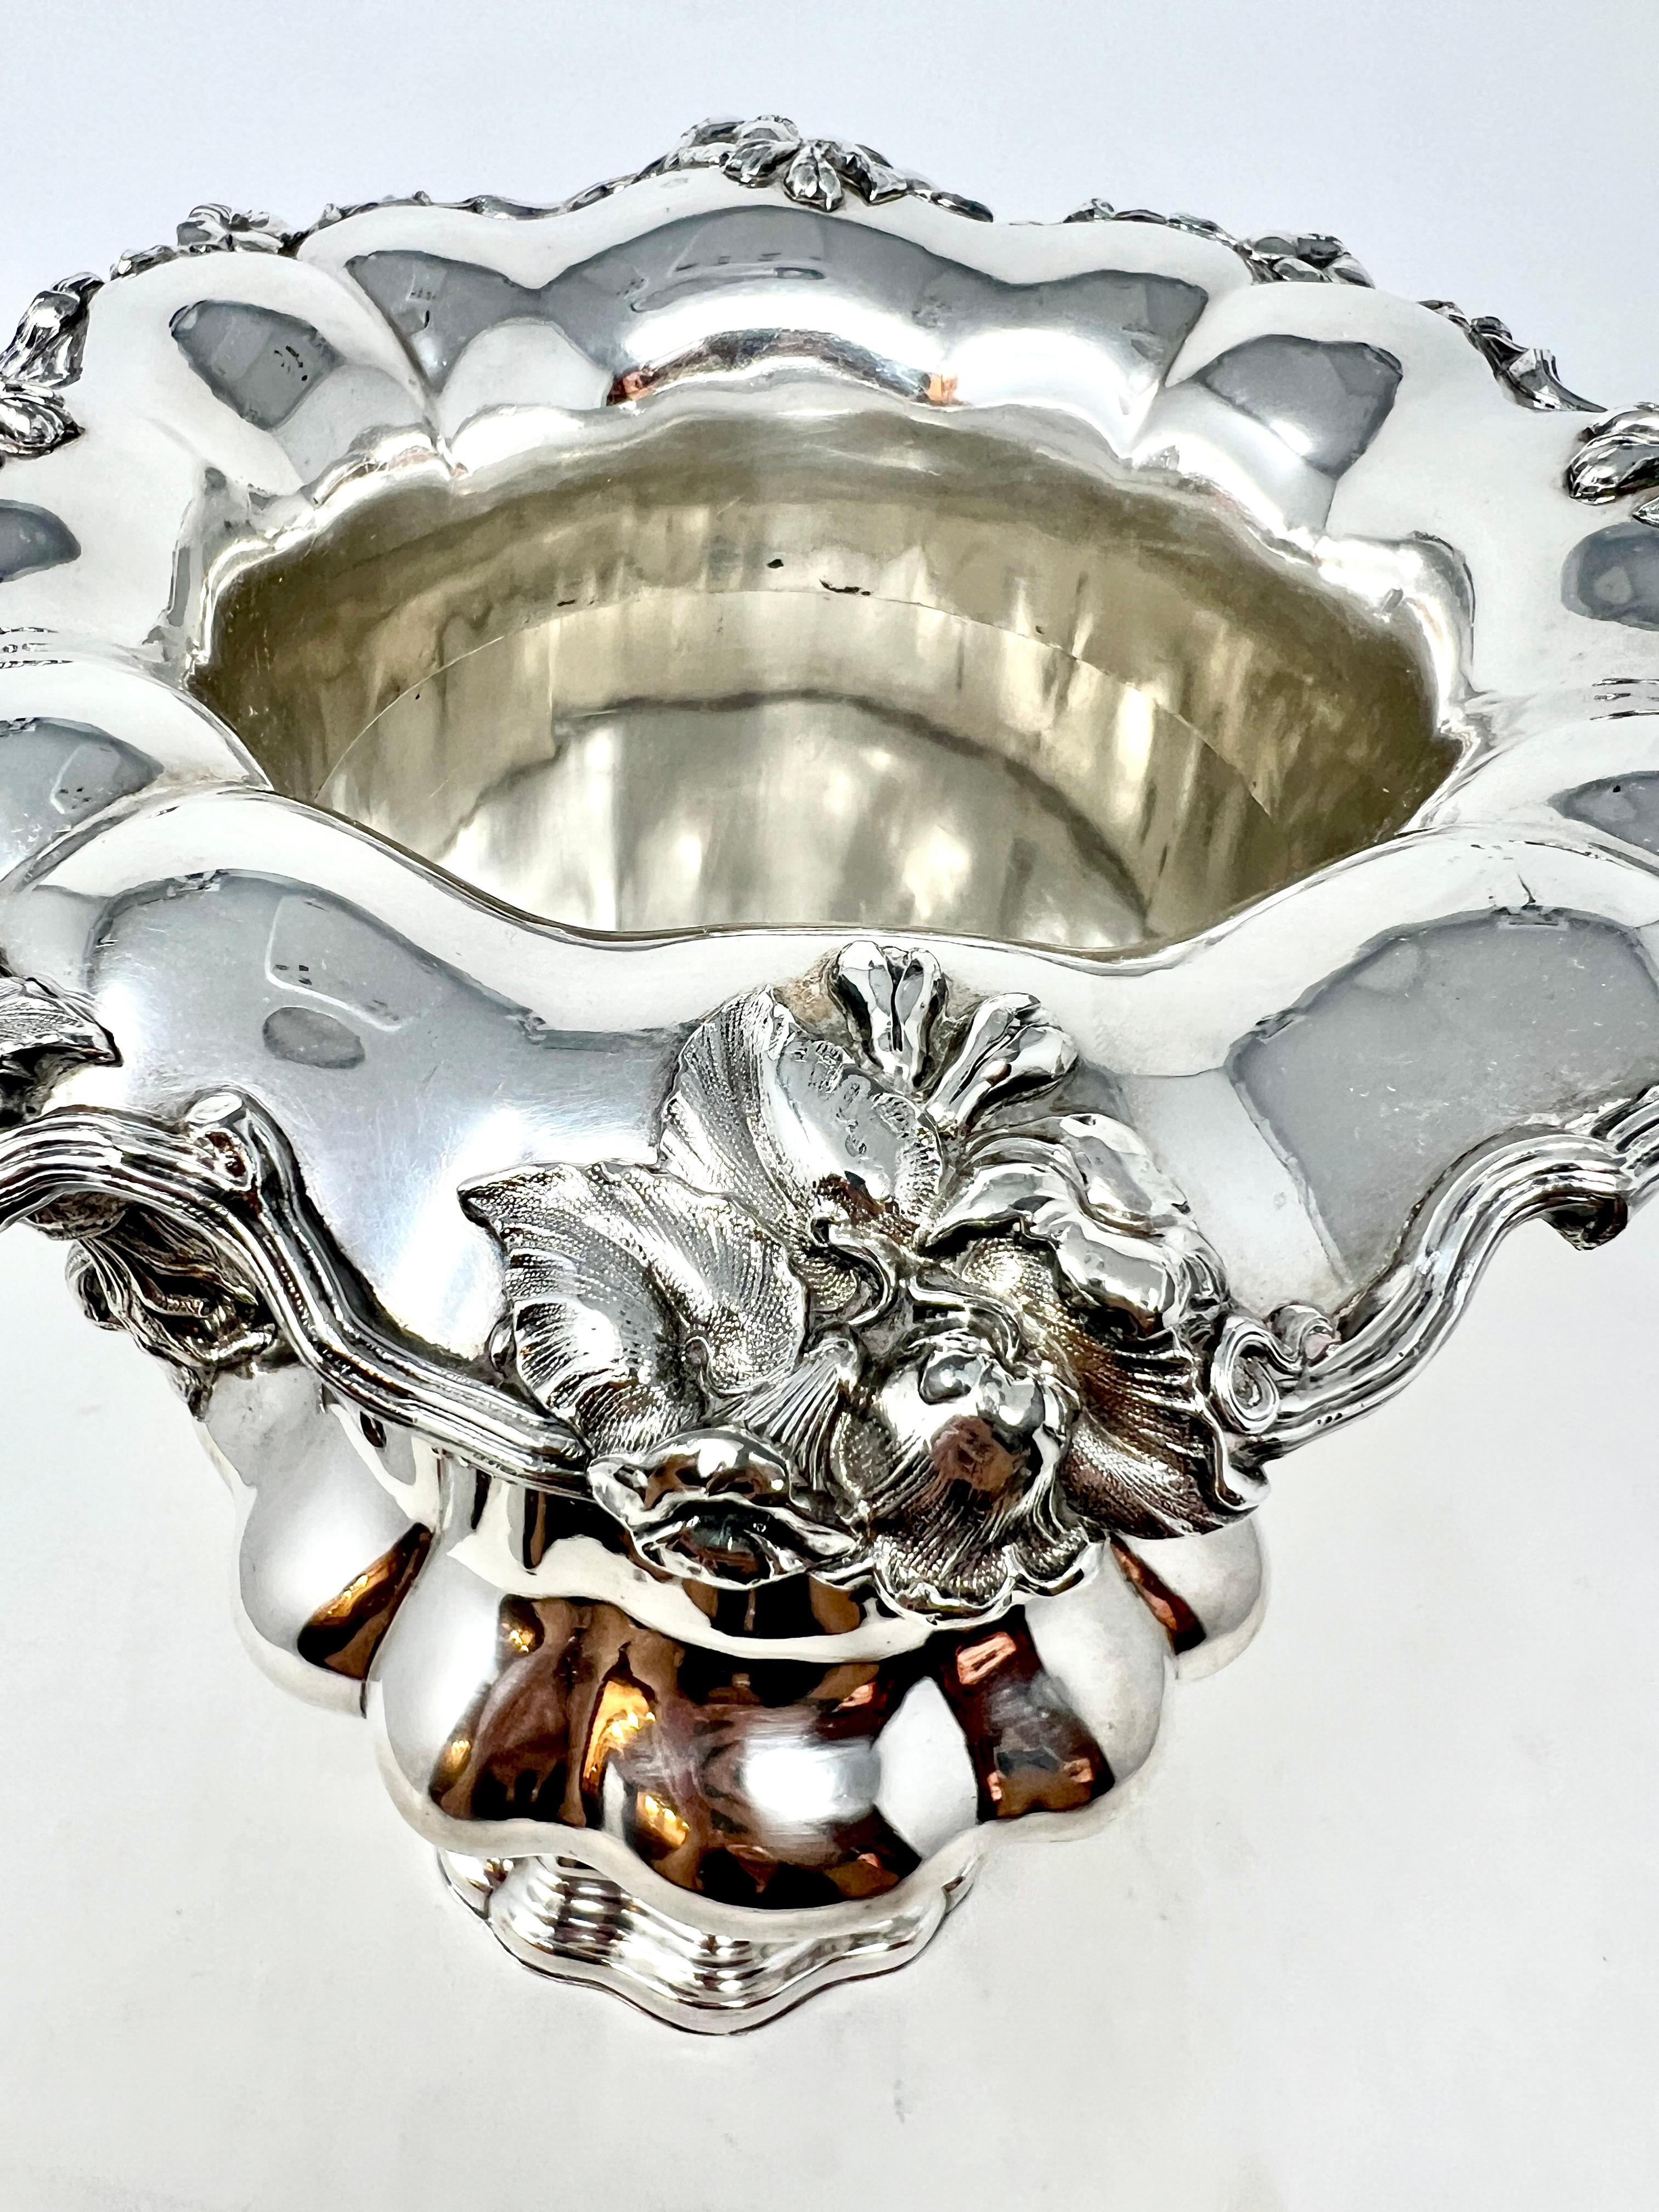 19th Century Antique English Silver Plated Champagne Bucket, Circa 1890-1900. For Sale